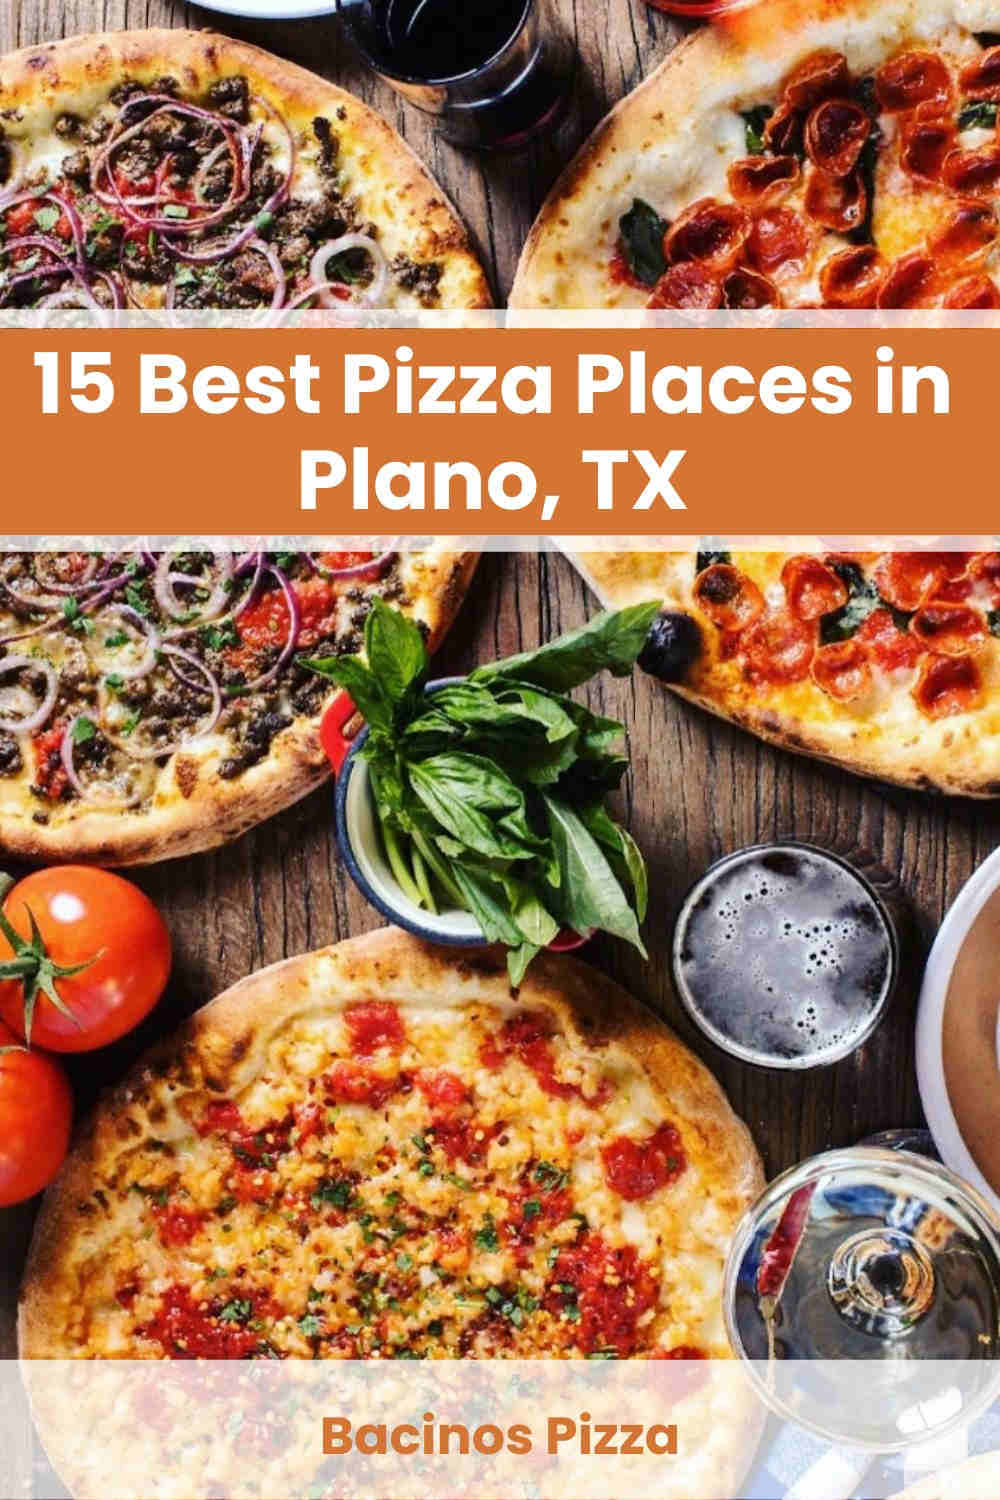 Pizza Places in Plano